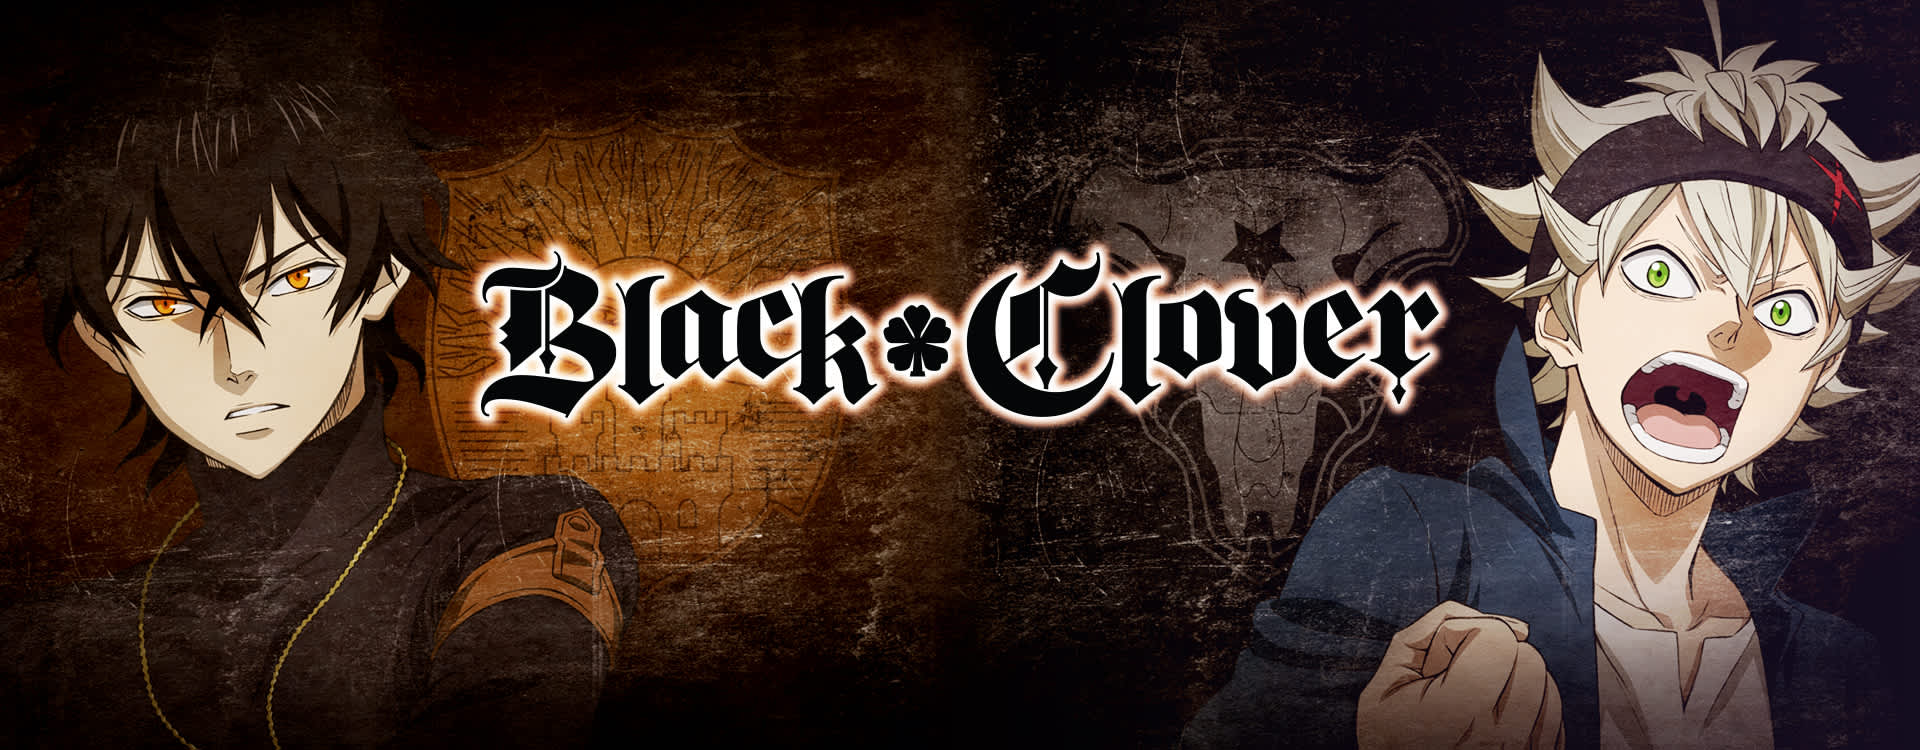 Sony Pictures UK to release Black Clover anime series for home video  release! • Anime UK News